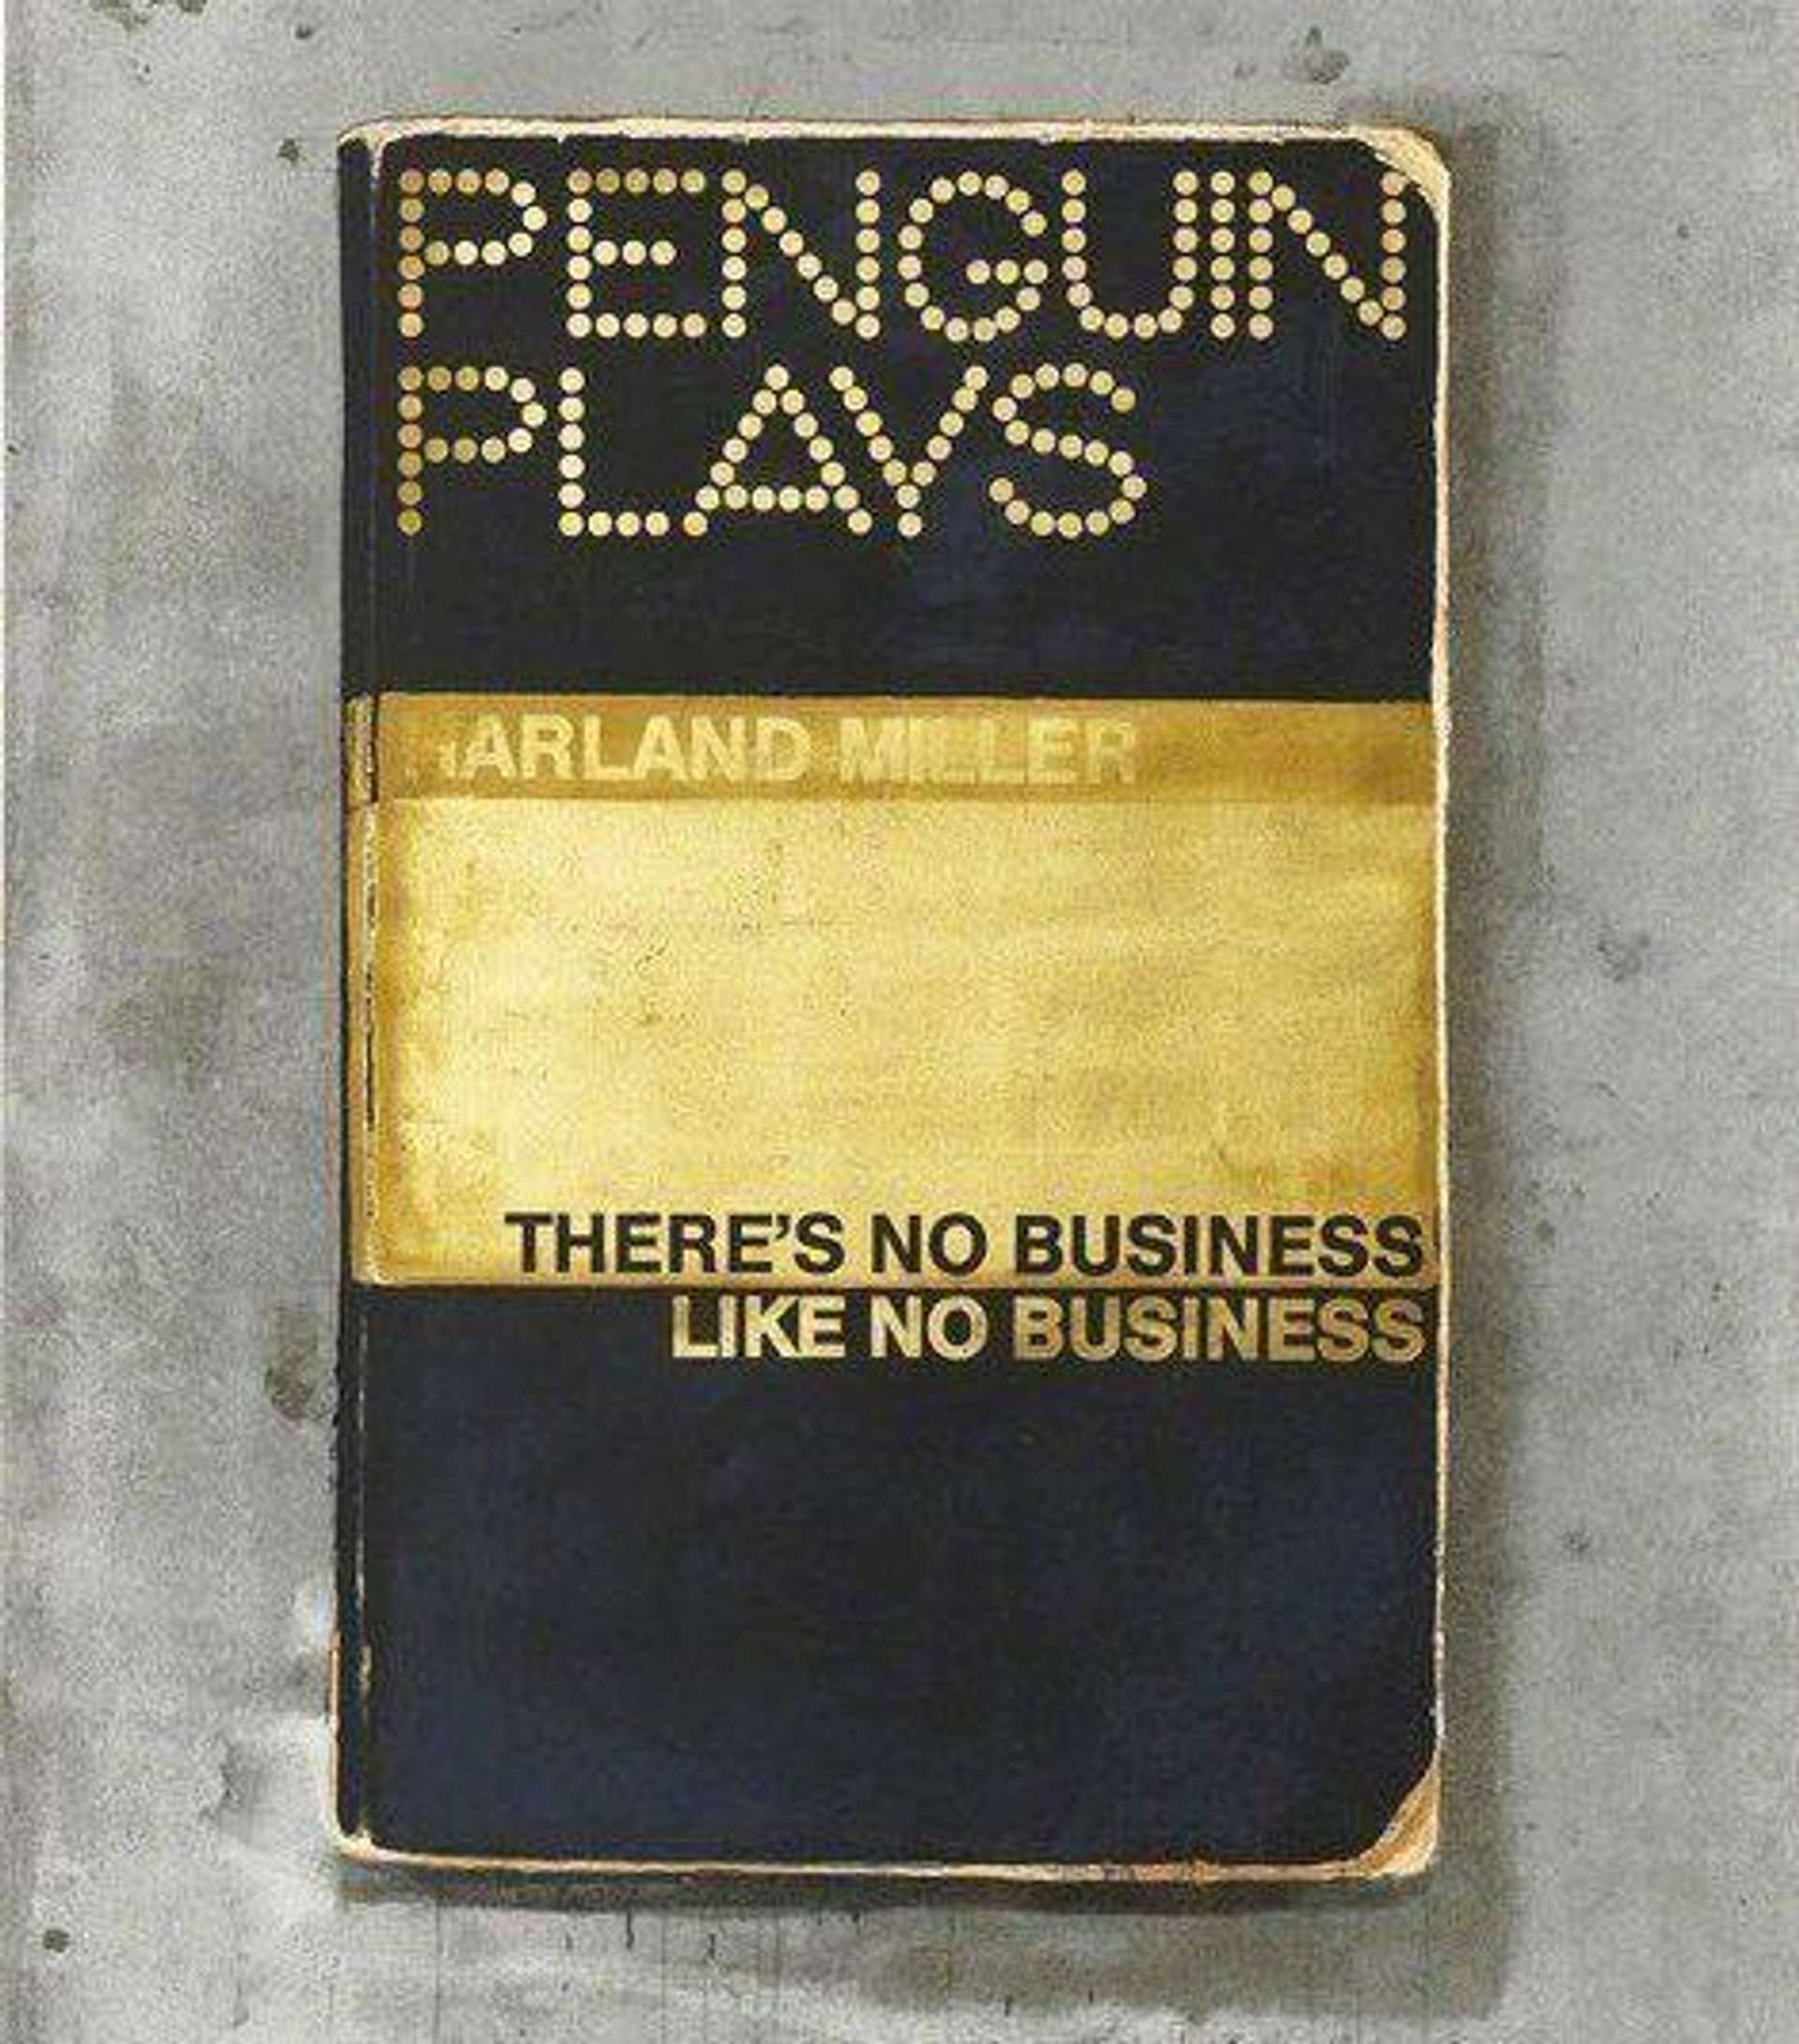 There’s No Business Like No Business - Signed Print by Harland Miller 2015 - MyArtBroker